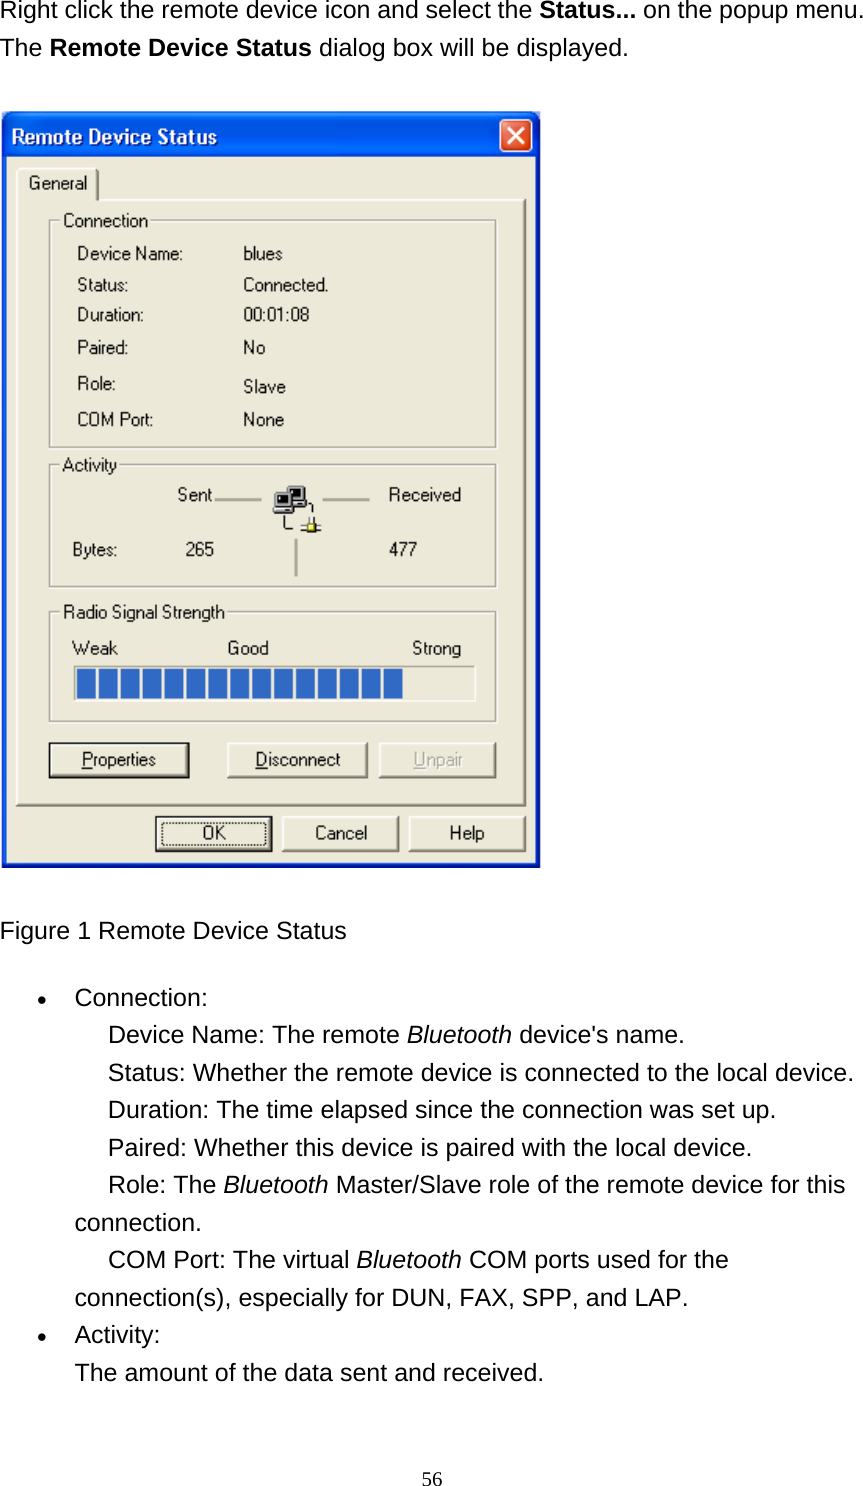   56Right click the remote device icon and select the Status... on the popup menu. The Remote Device Status dialog box will be displayed.  Figure 1 Remote Device Status • Connection:      Device Name: The remote Bluetooth device&apos;s name.      Status: Whether the remote device is connected to the local device.      Duration: The time elapsed since the connection was set up.      Paired: Whether this device is paired with the local device.      Role: The Bluetooth Master/Slave role of the remote device for this connection.      COM Port: The virtual Bluetooth COM ports used for the connection(s), especially for DUN, FAX, SPP, and LAP.   • Activity: The amount of the data sent and received.   